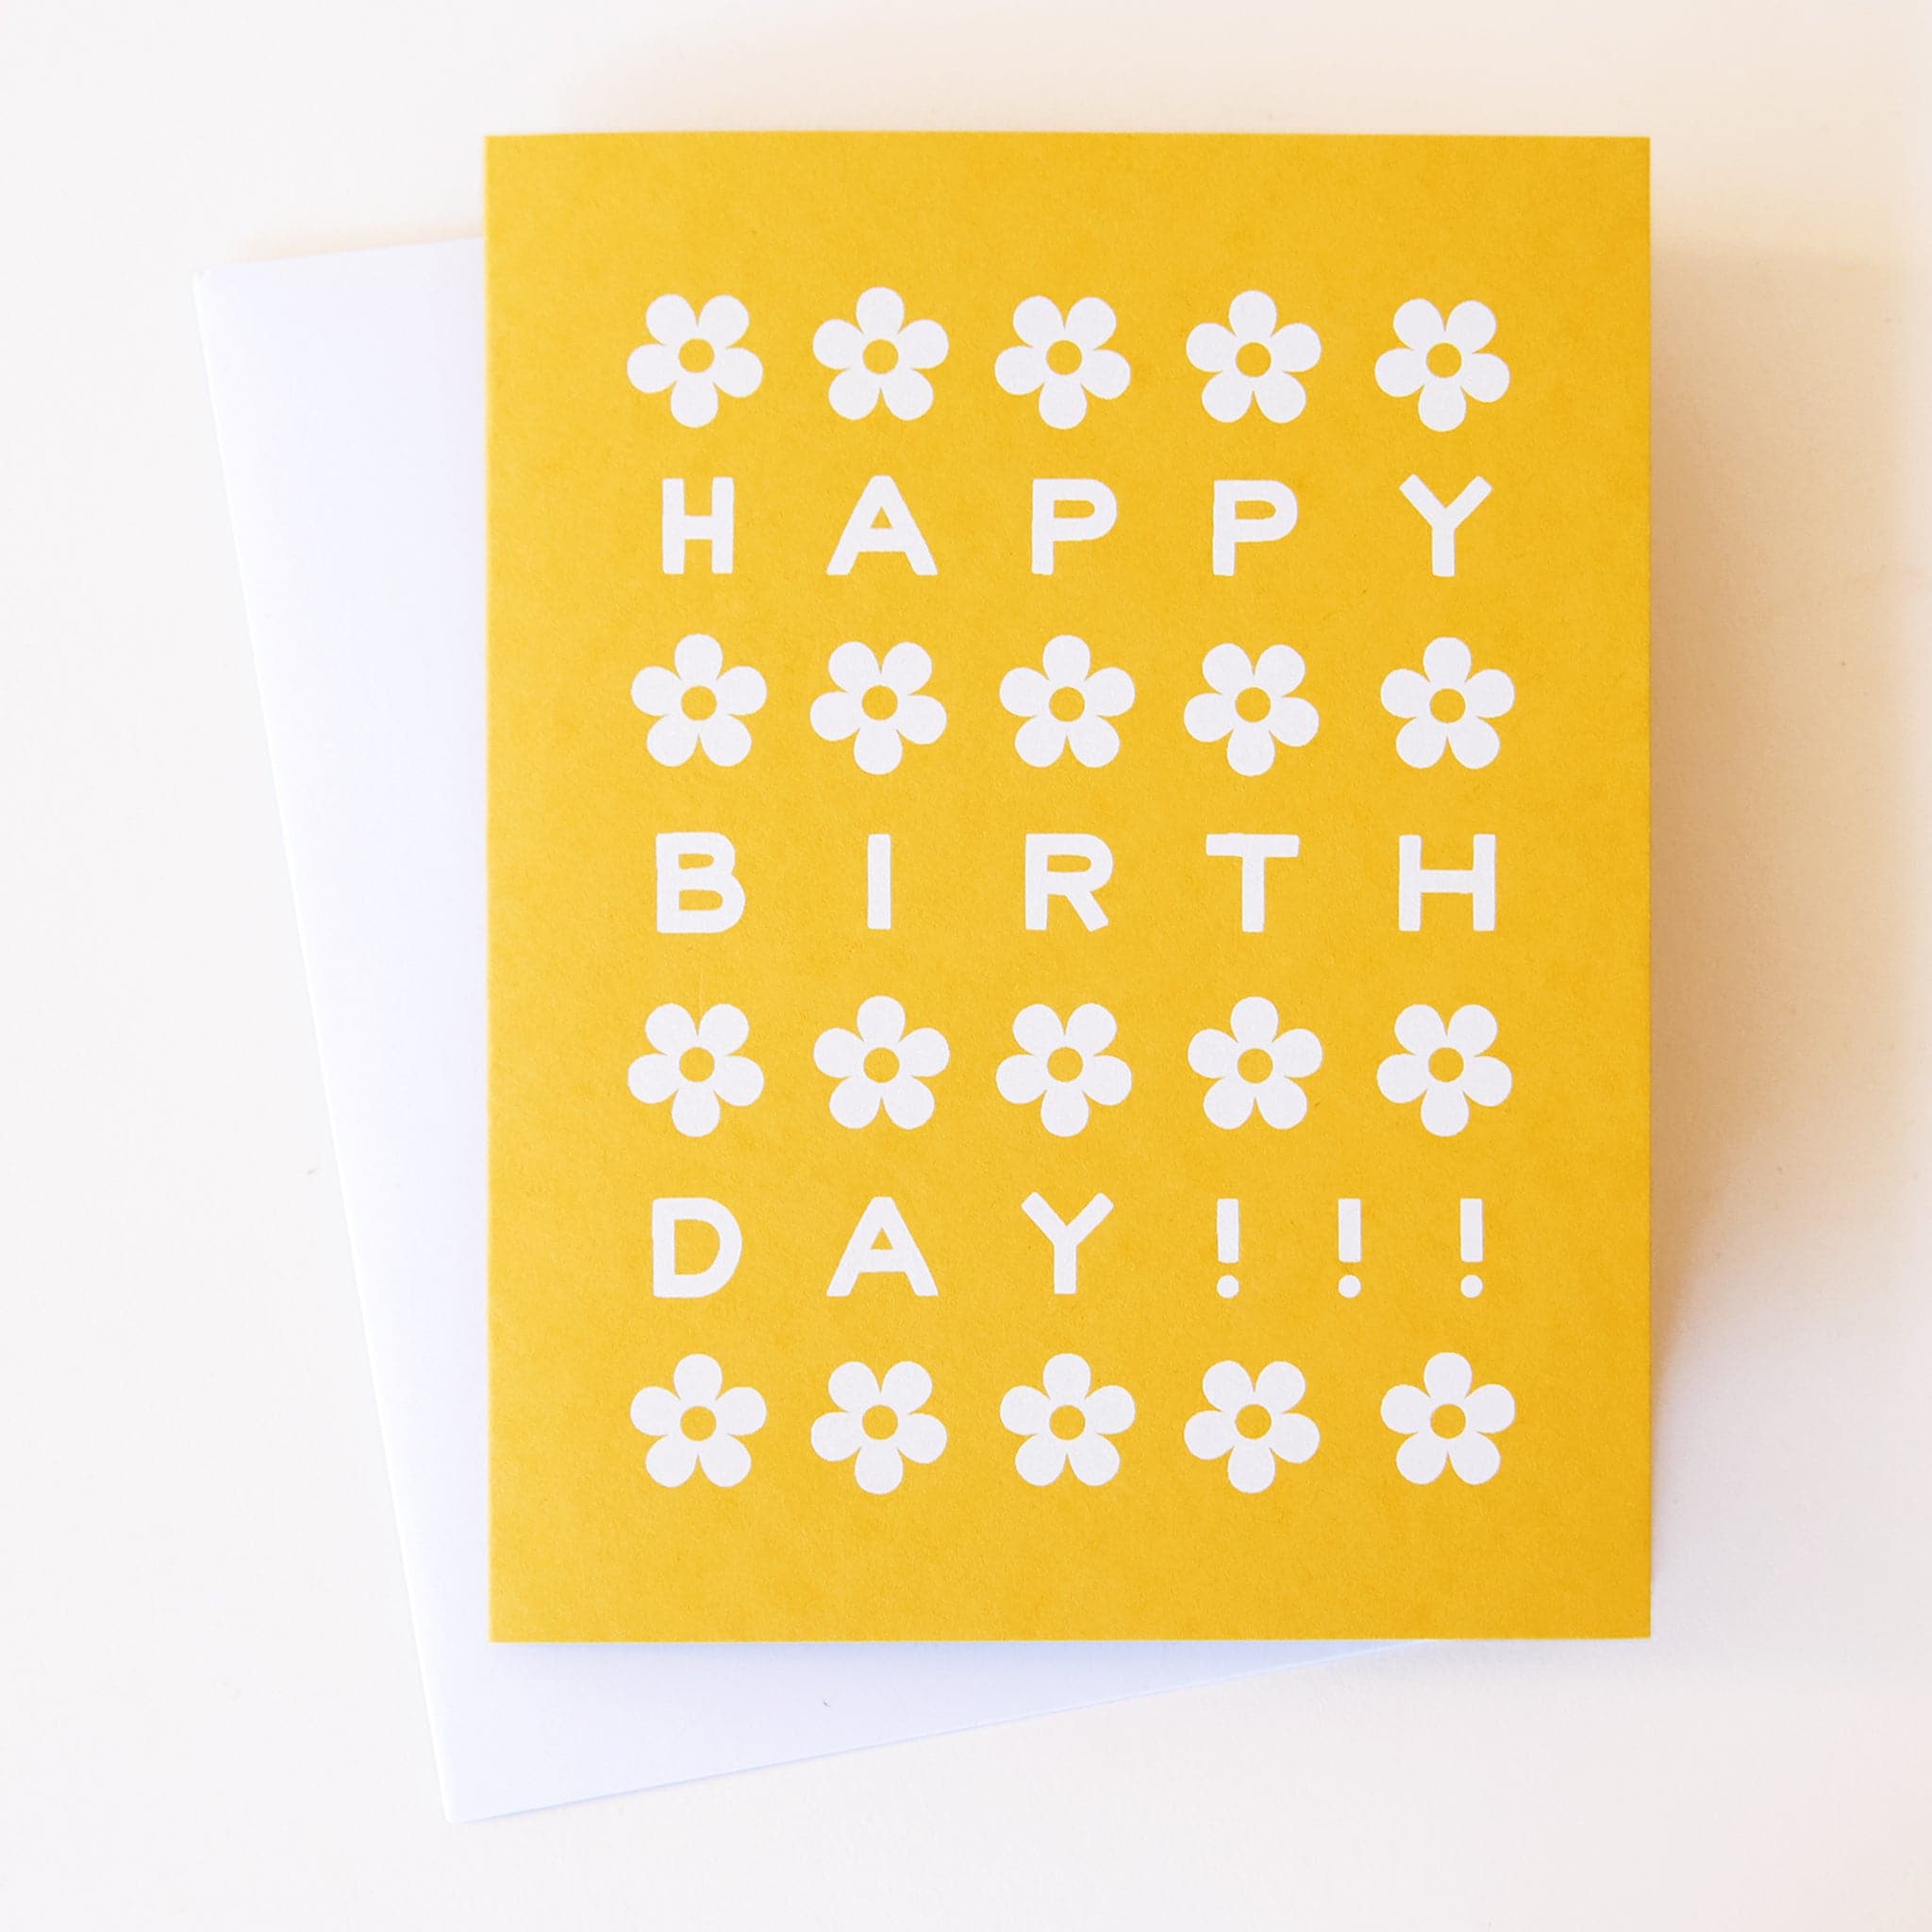 A bright gold card featuring white illustrated daisies and text reading &quot;Happy Birthday!!!&quot; in-between each row of daisies.